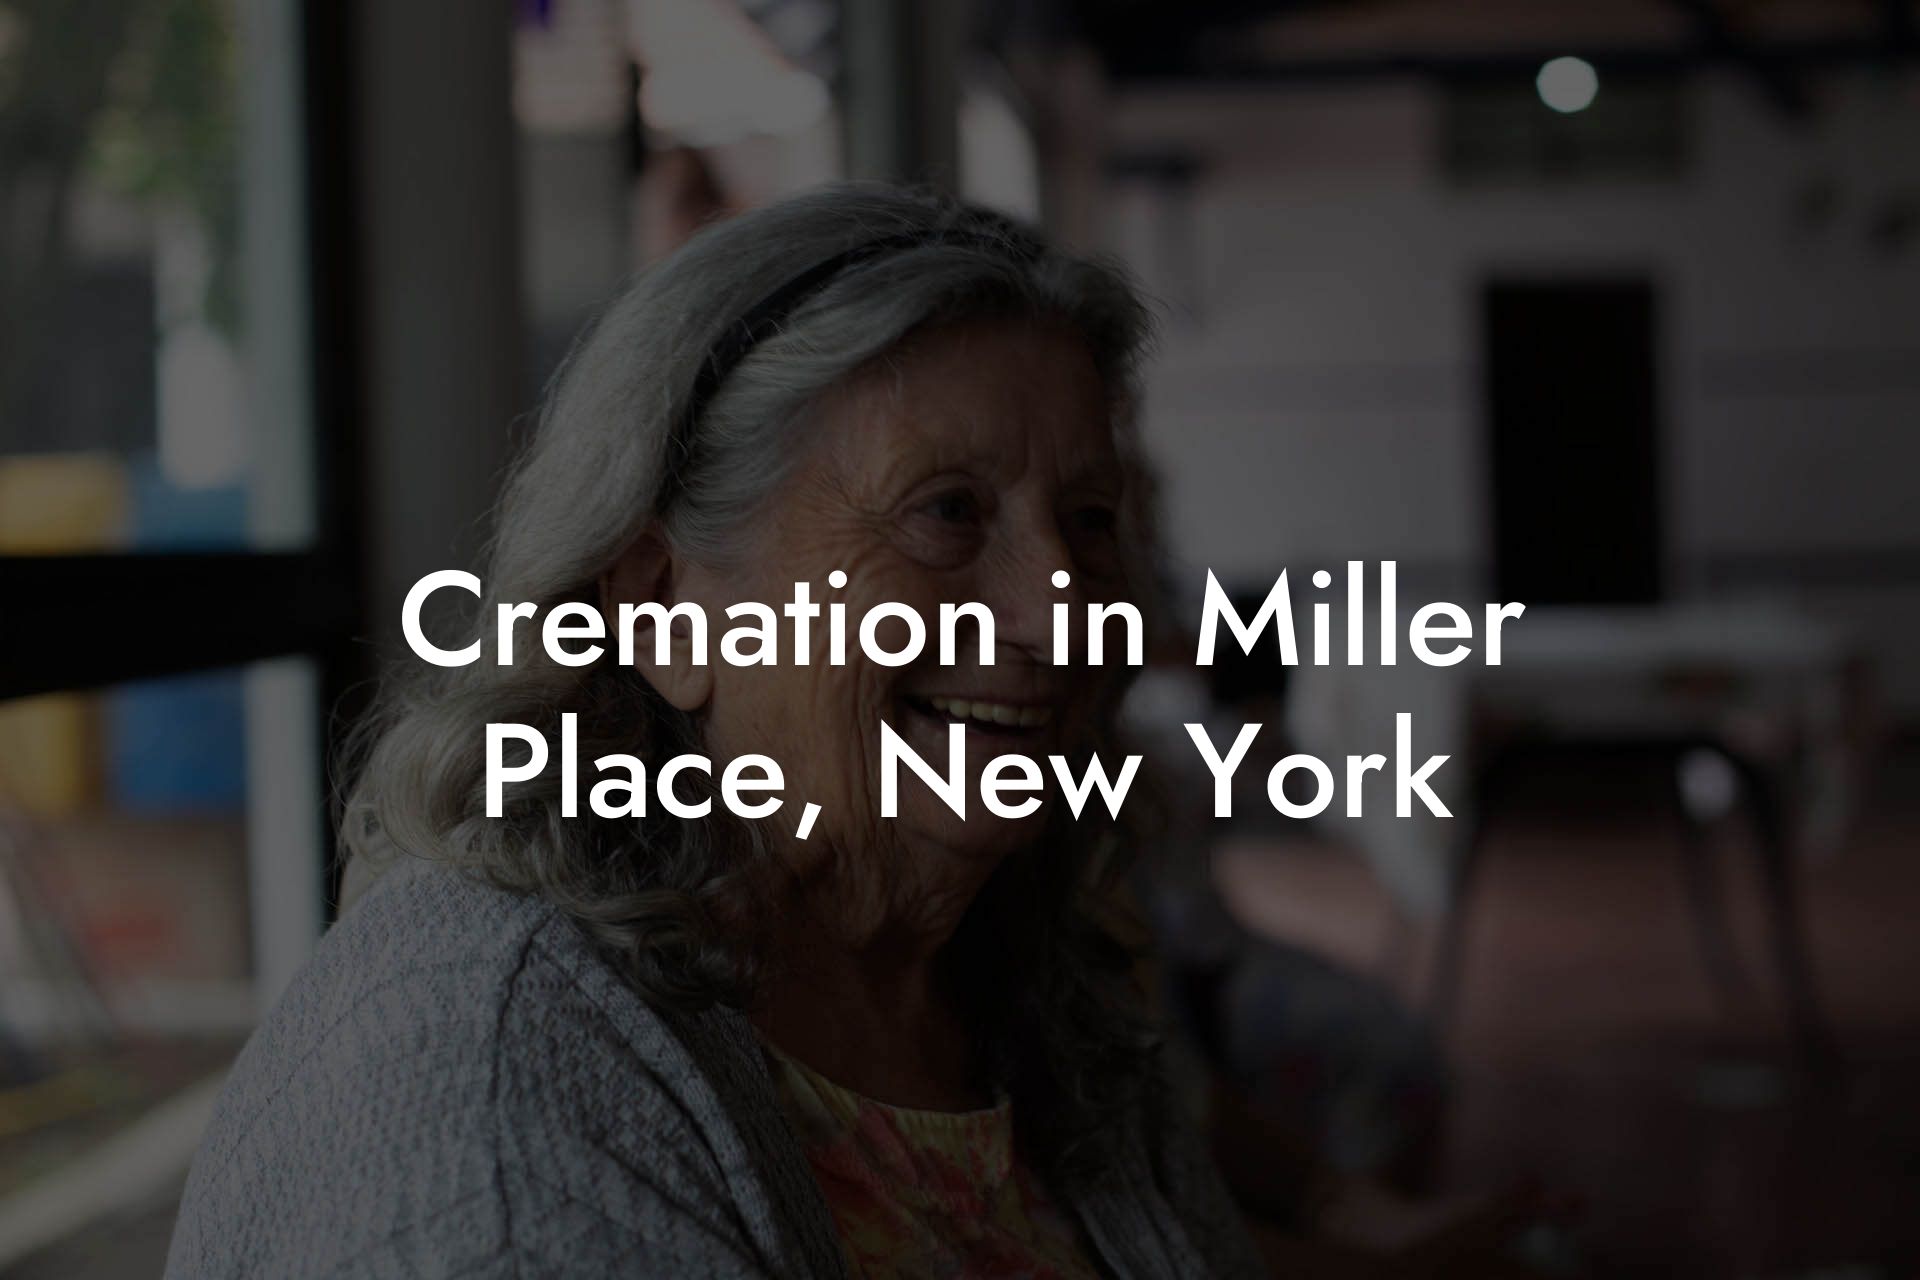 Cremation in Miller Place, New York